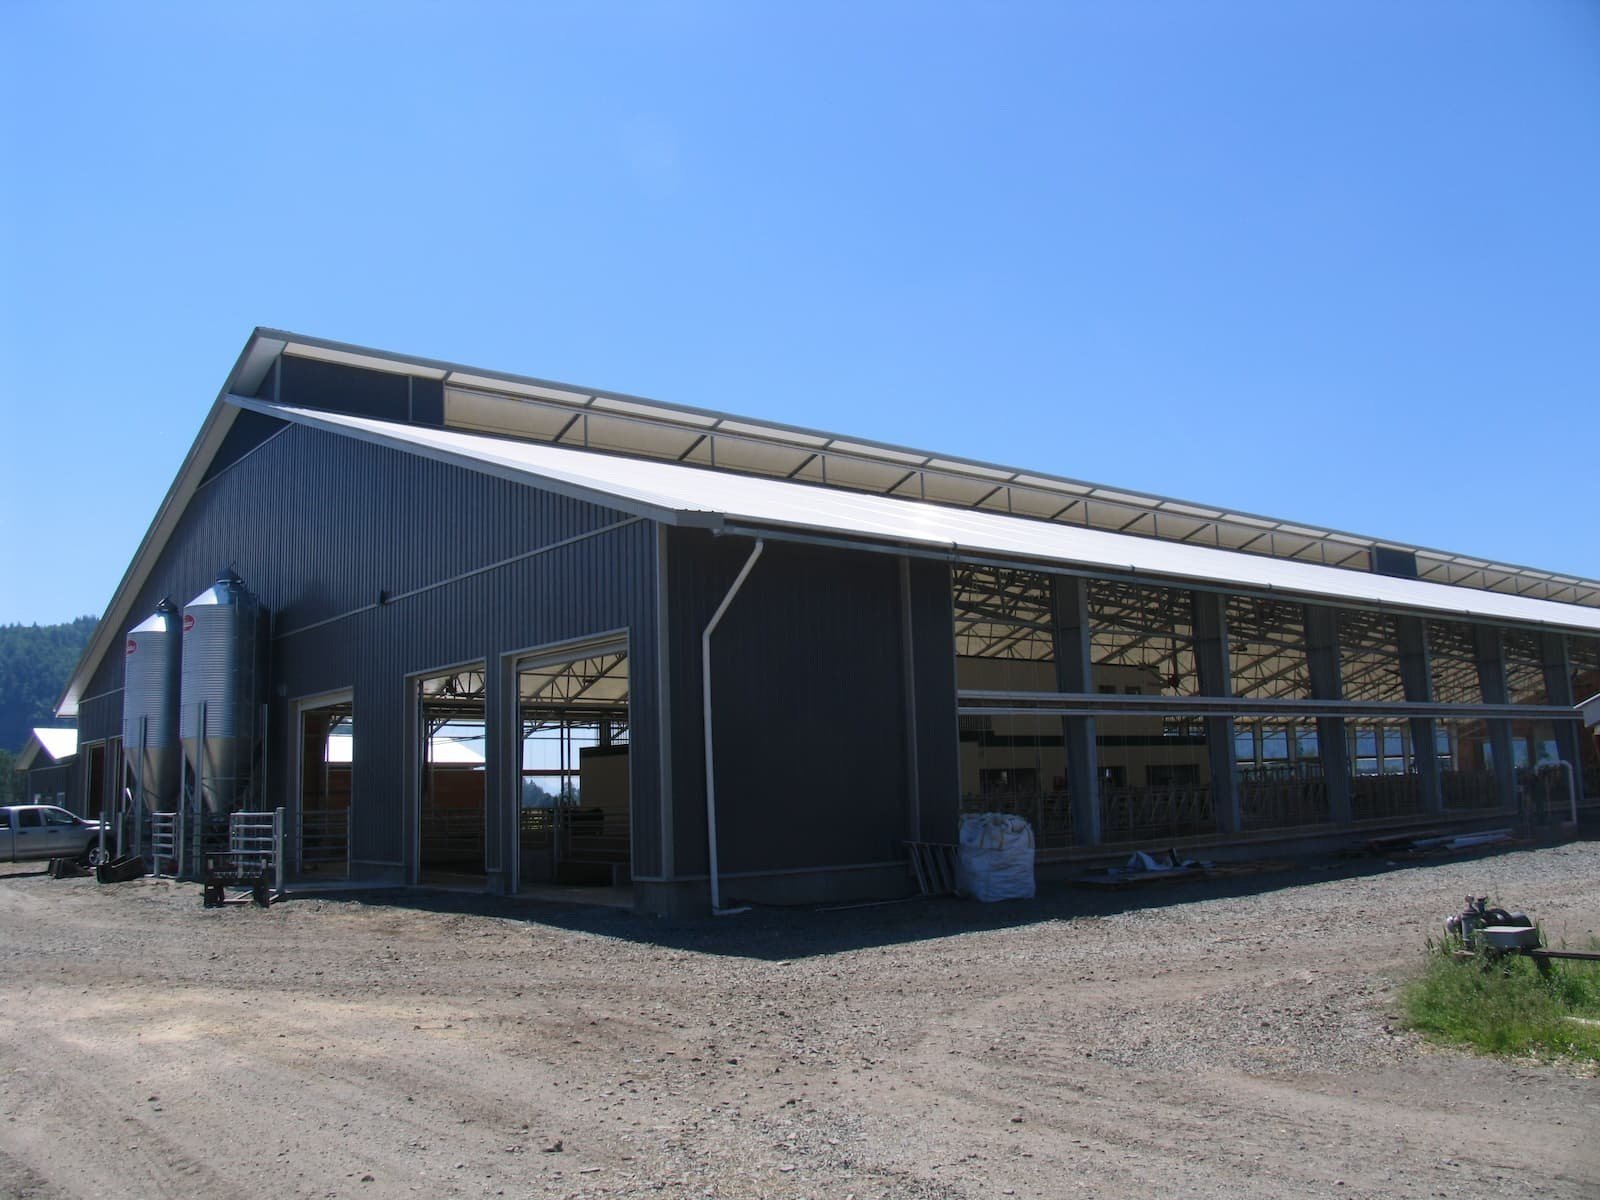  A 140' x 400'  fabric roof dairy barn in Agassiz, British Columbia. 